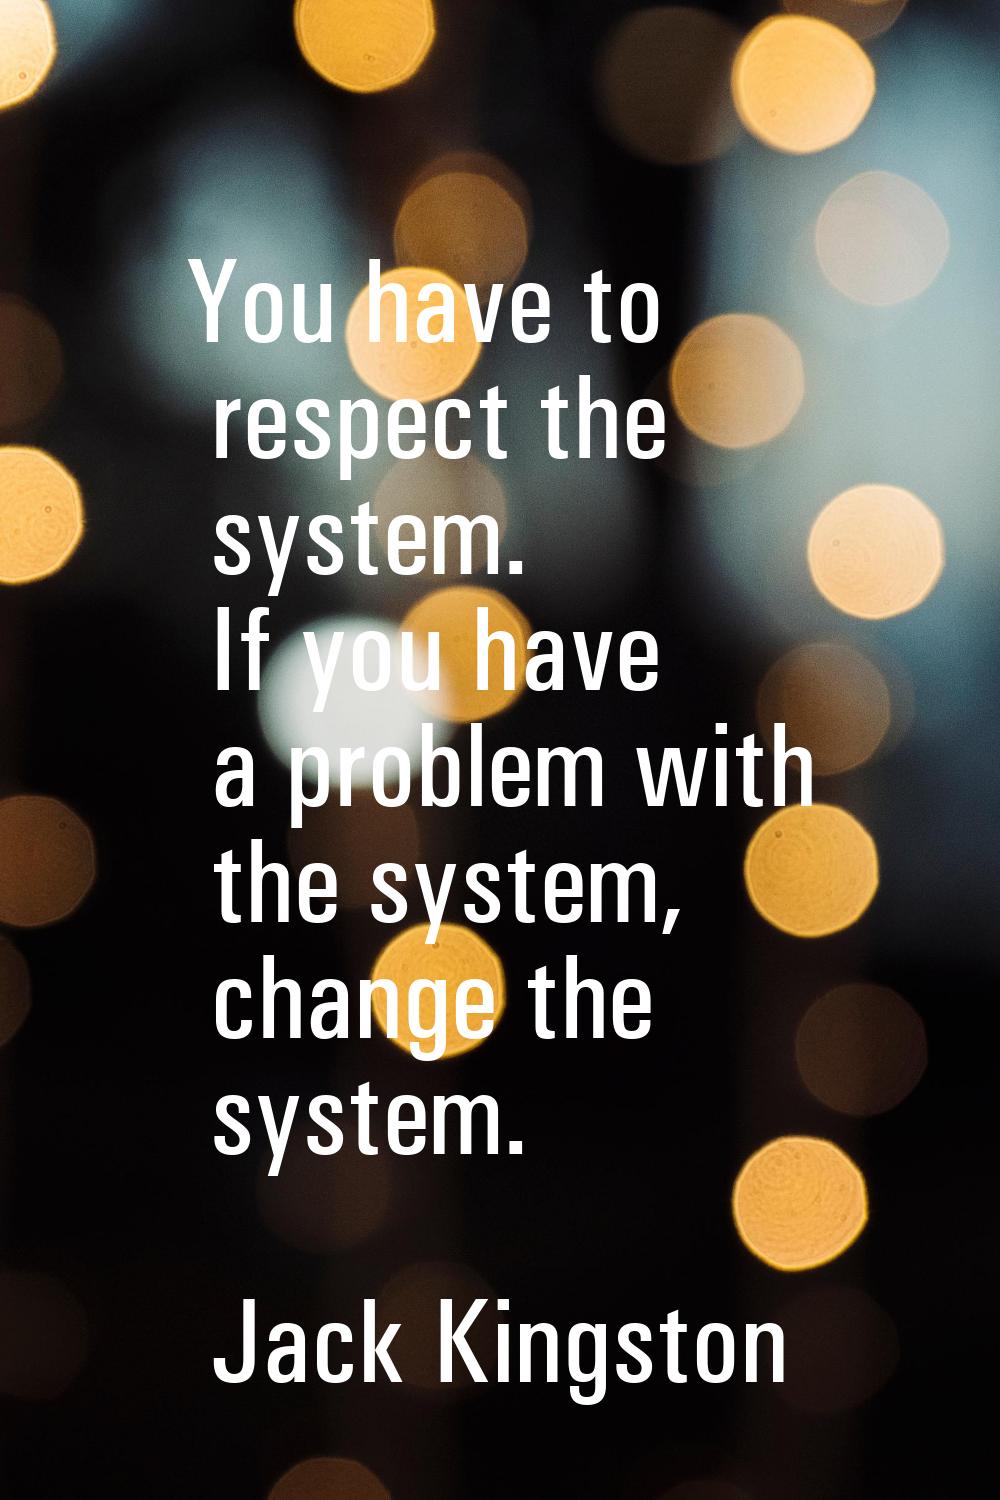 You have to respect the system. If you have a problem with the system, change the system.